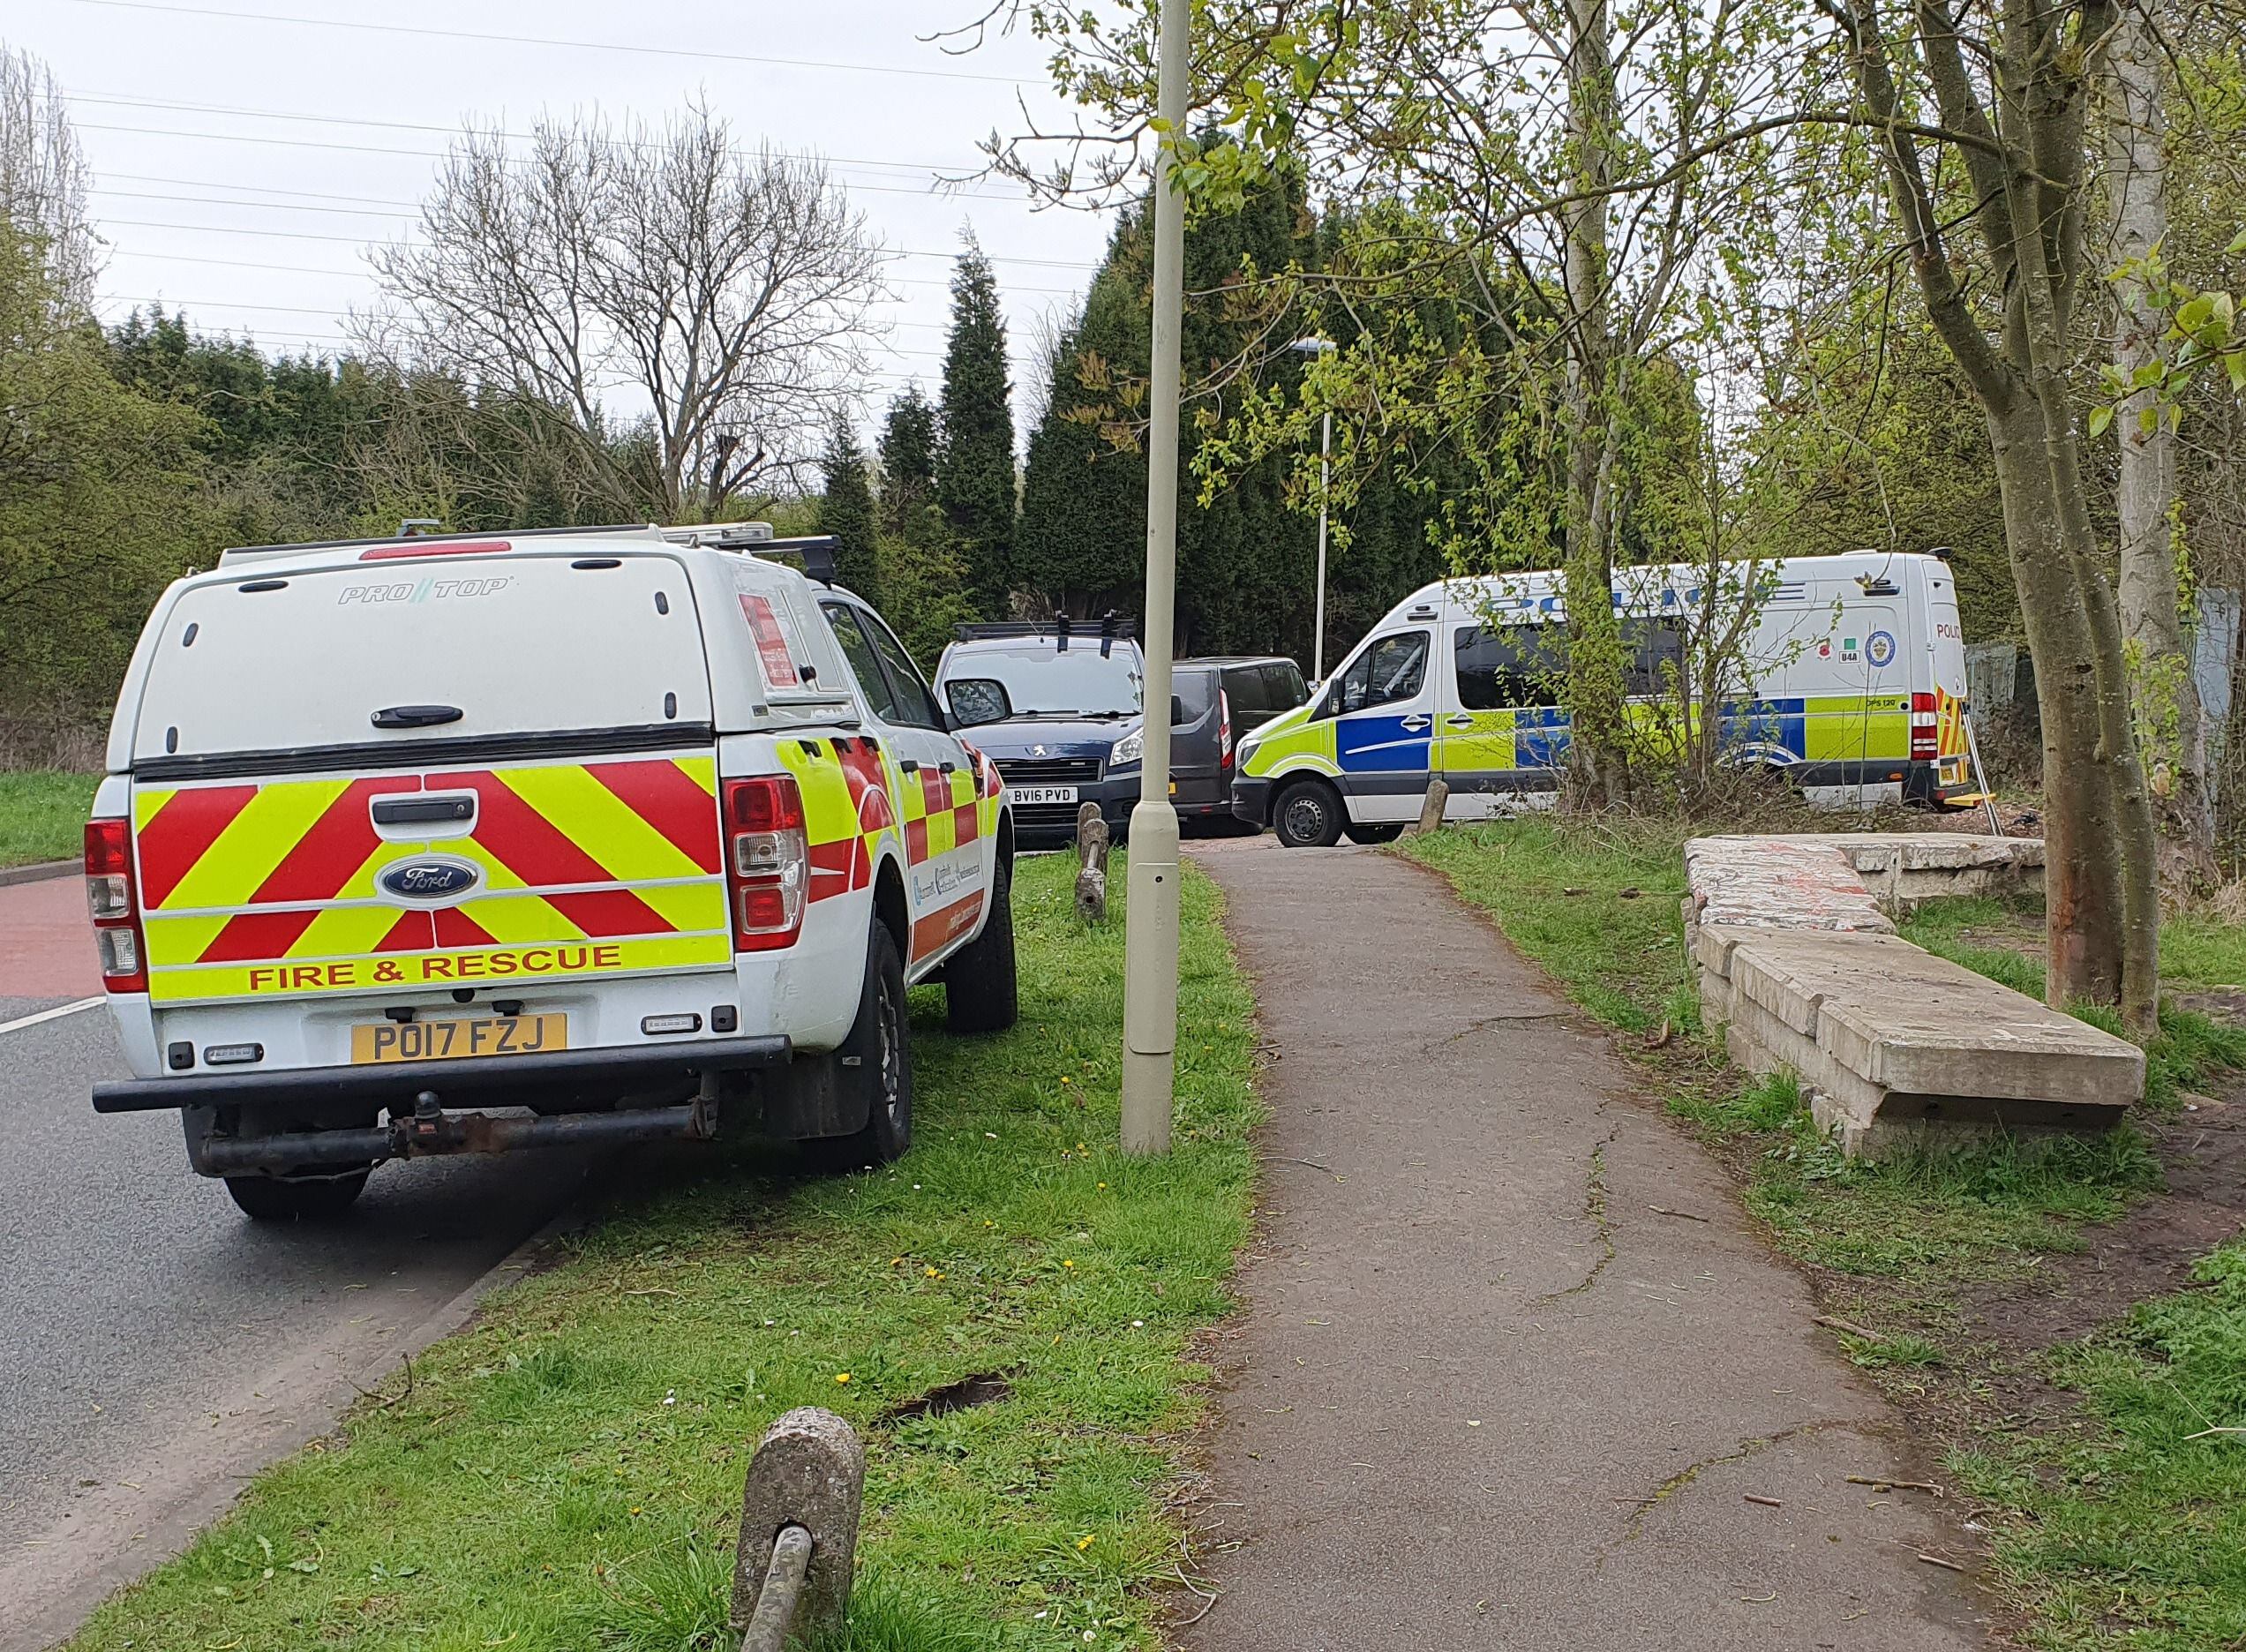 Large police presence at nature reserve as search for missing man continues